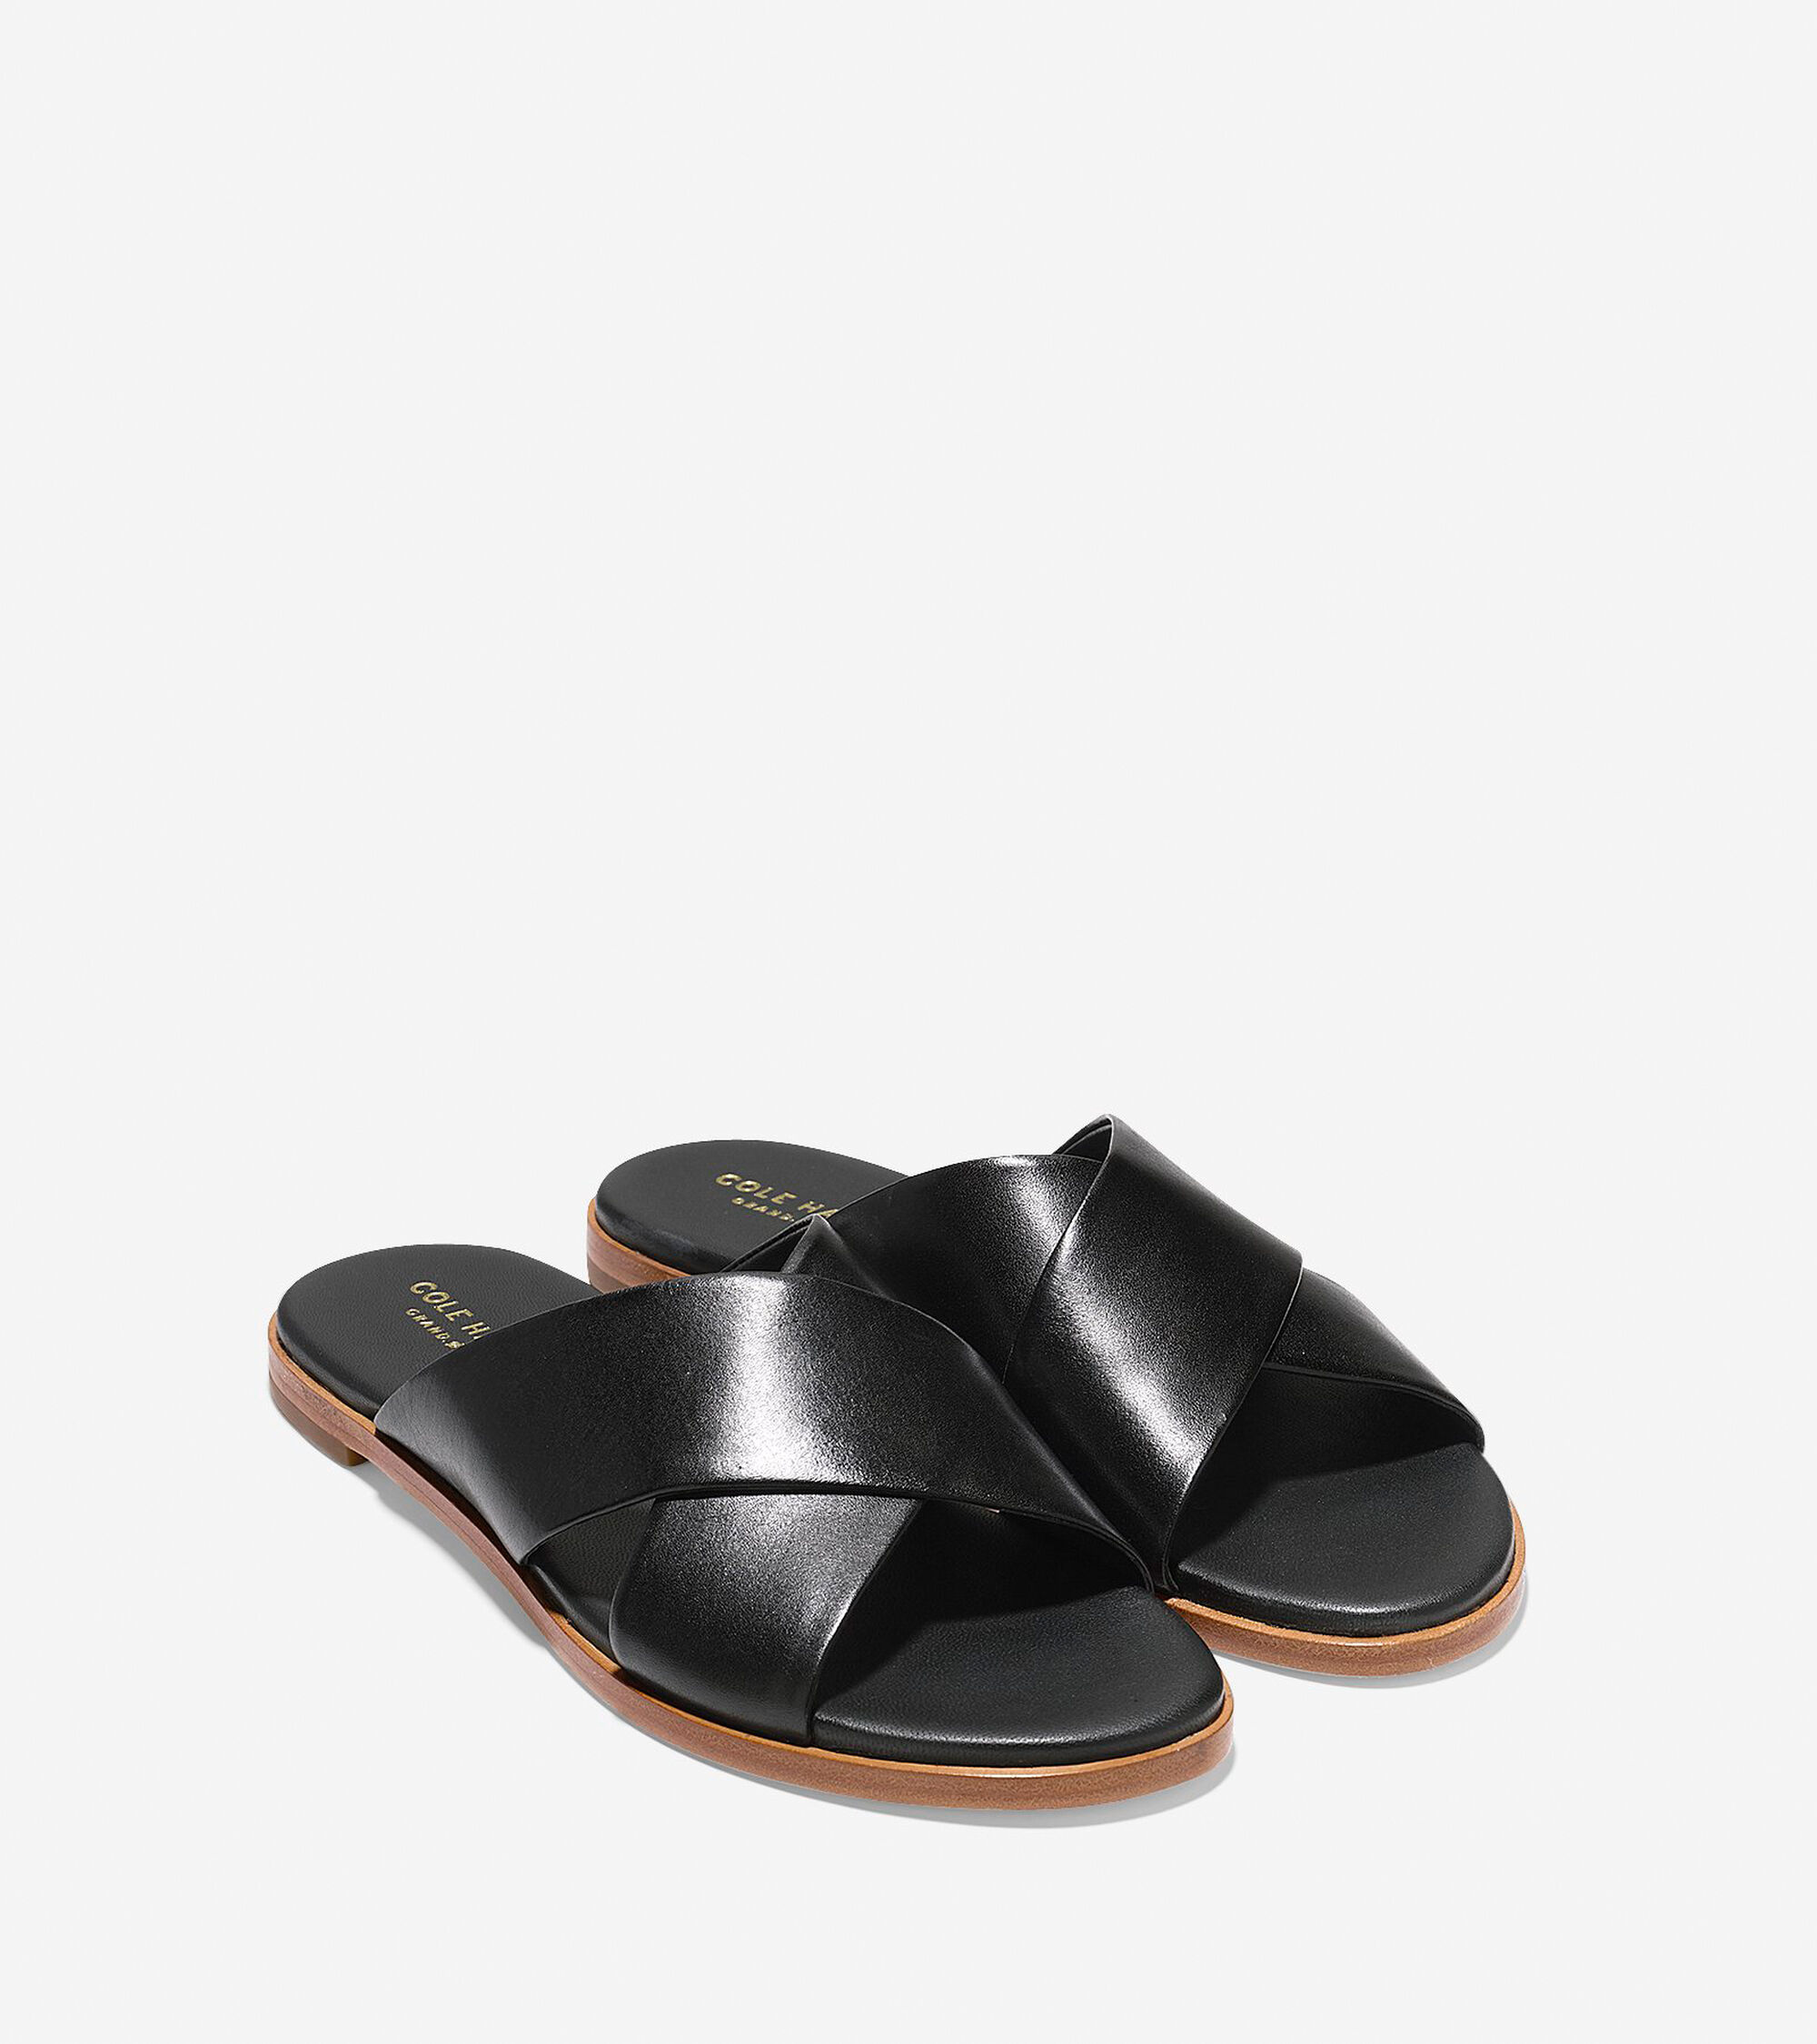 Anica Criss Cross Sandals in Black Leather | Cole Haan